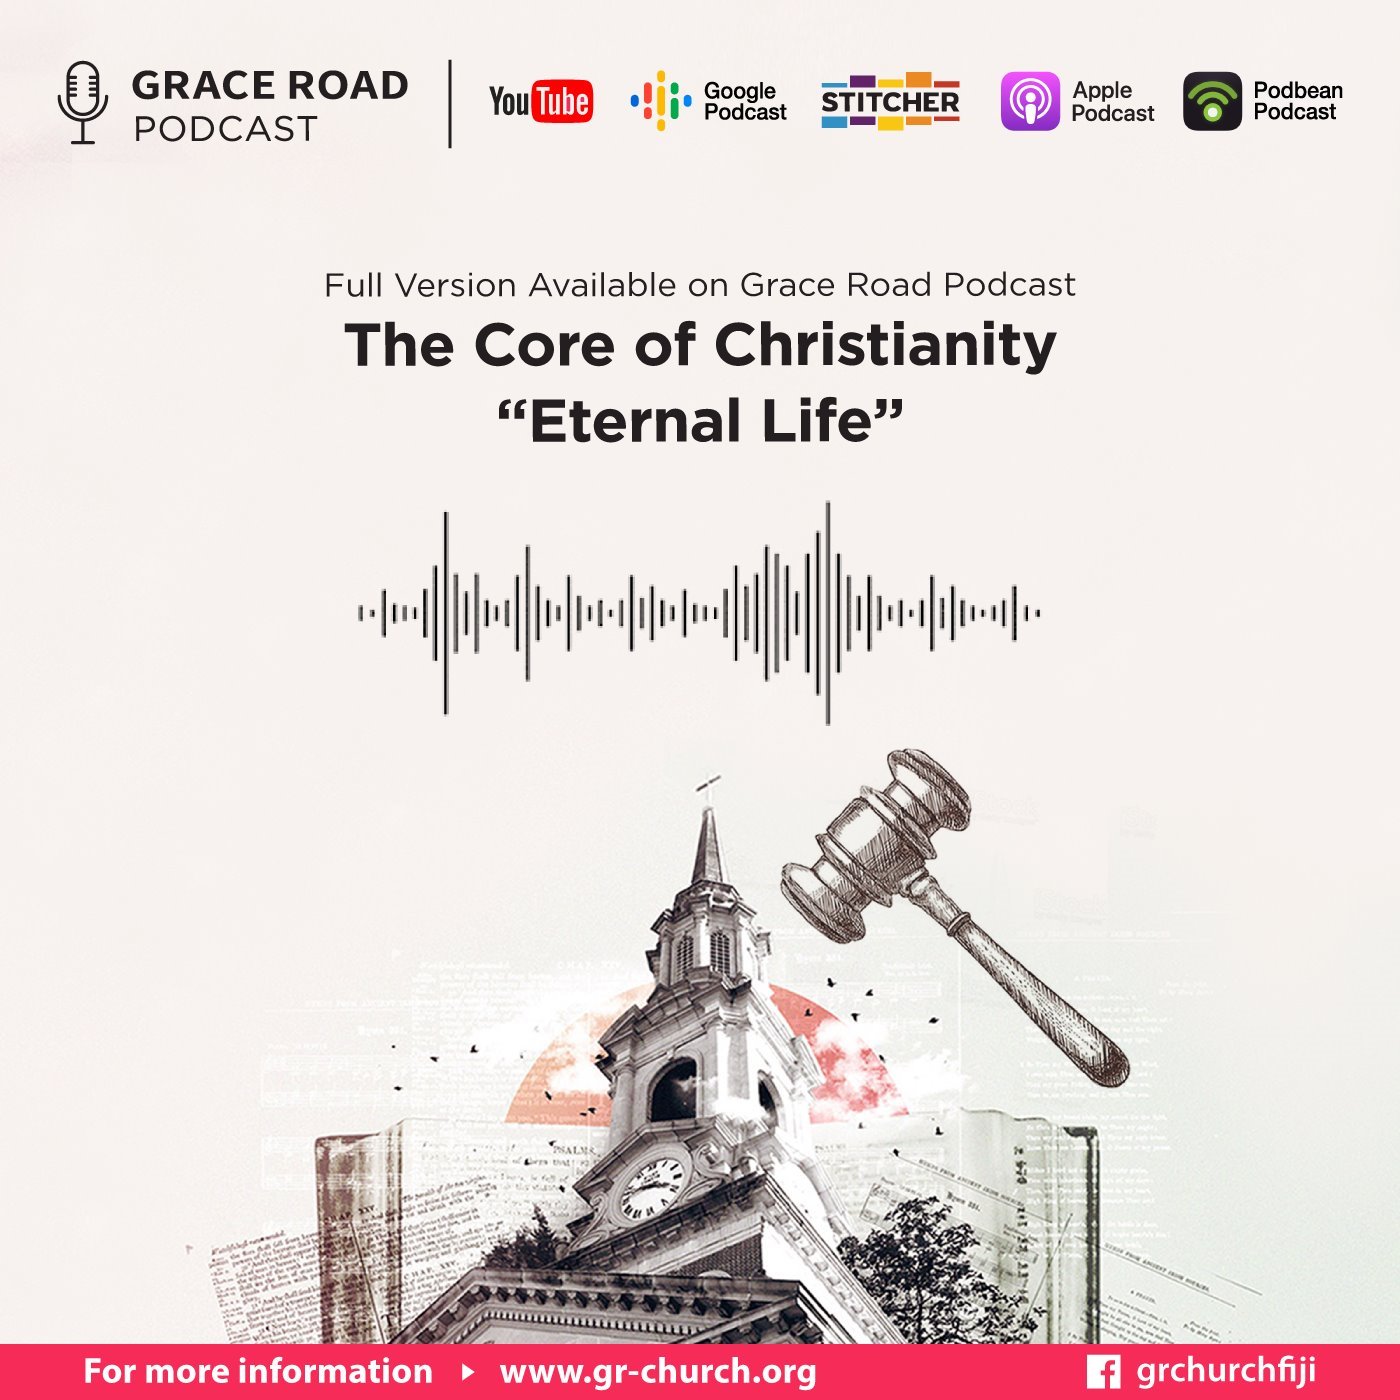 The Core of Chrstianity ”Eternal Life”